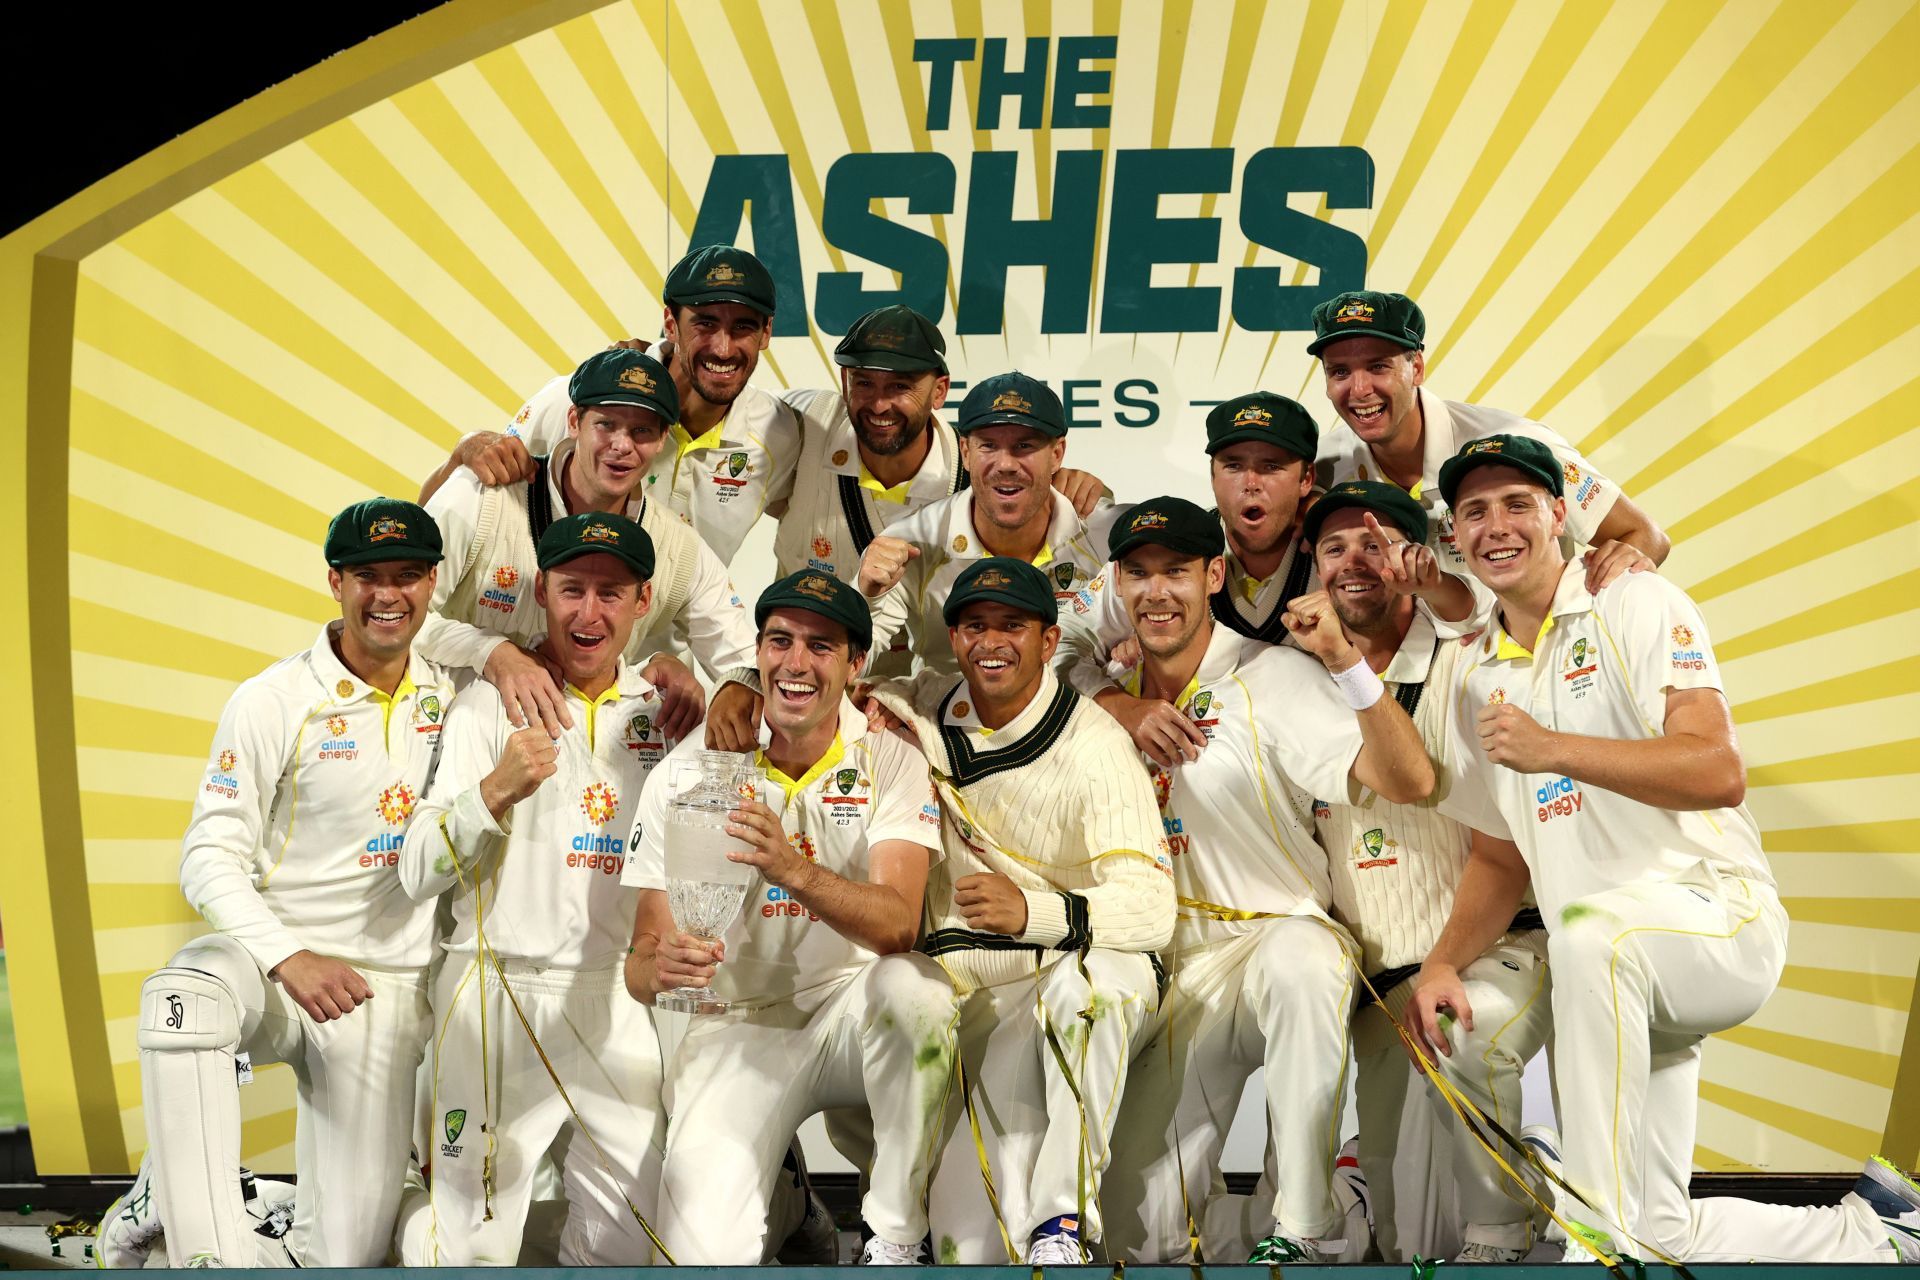 Australia beat England 4-0 in the recently-concluded Ashes series.